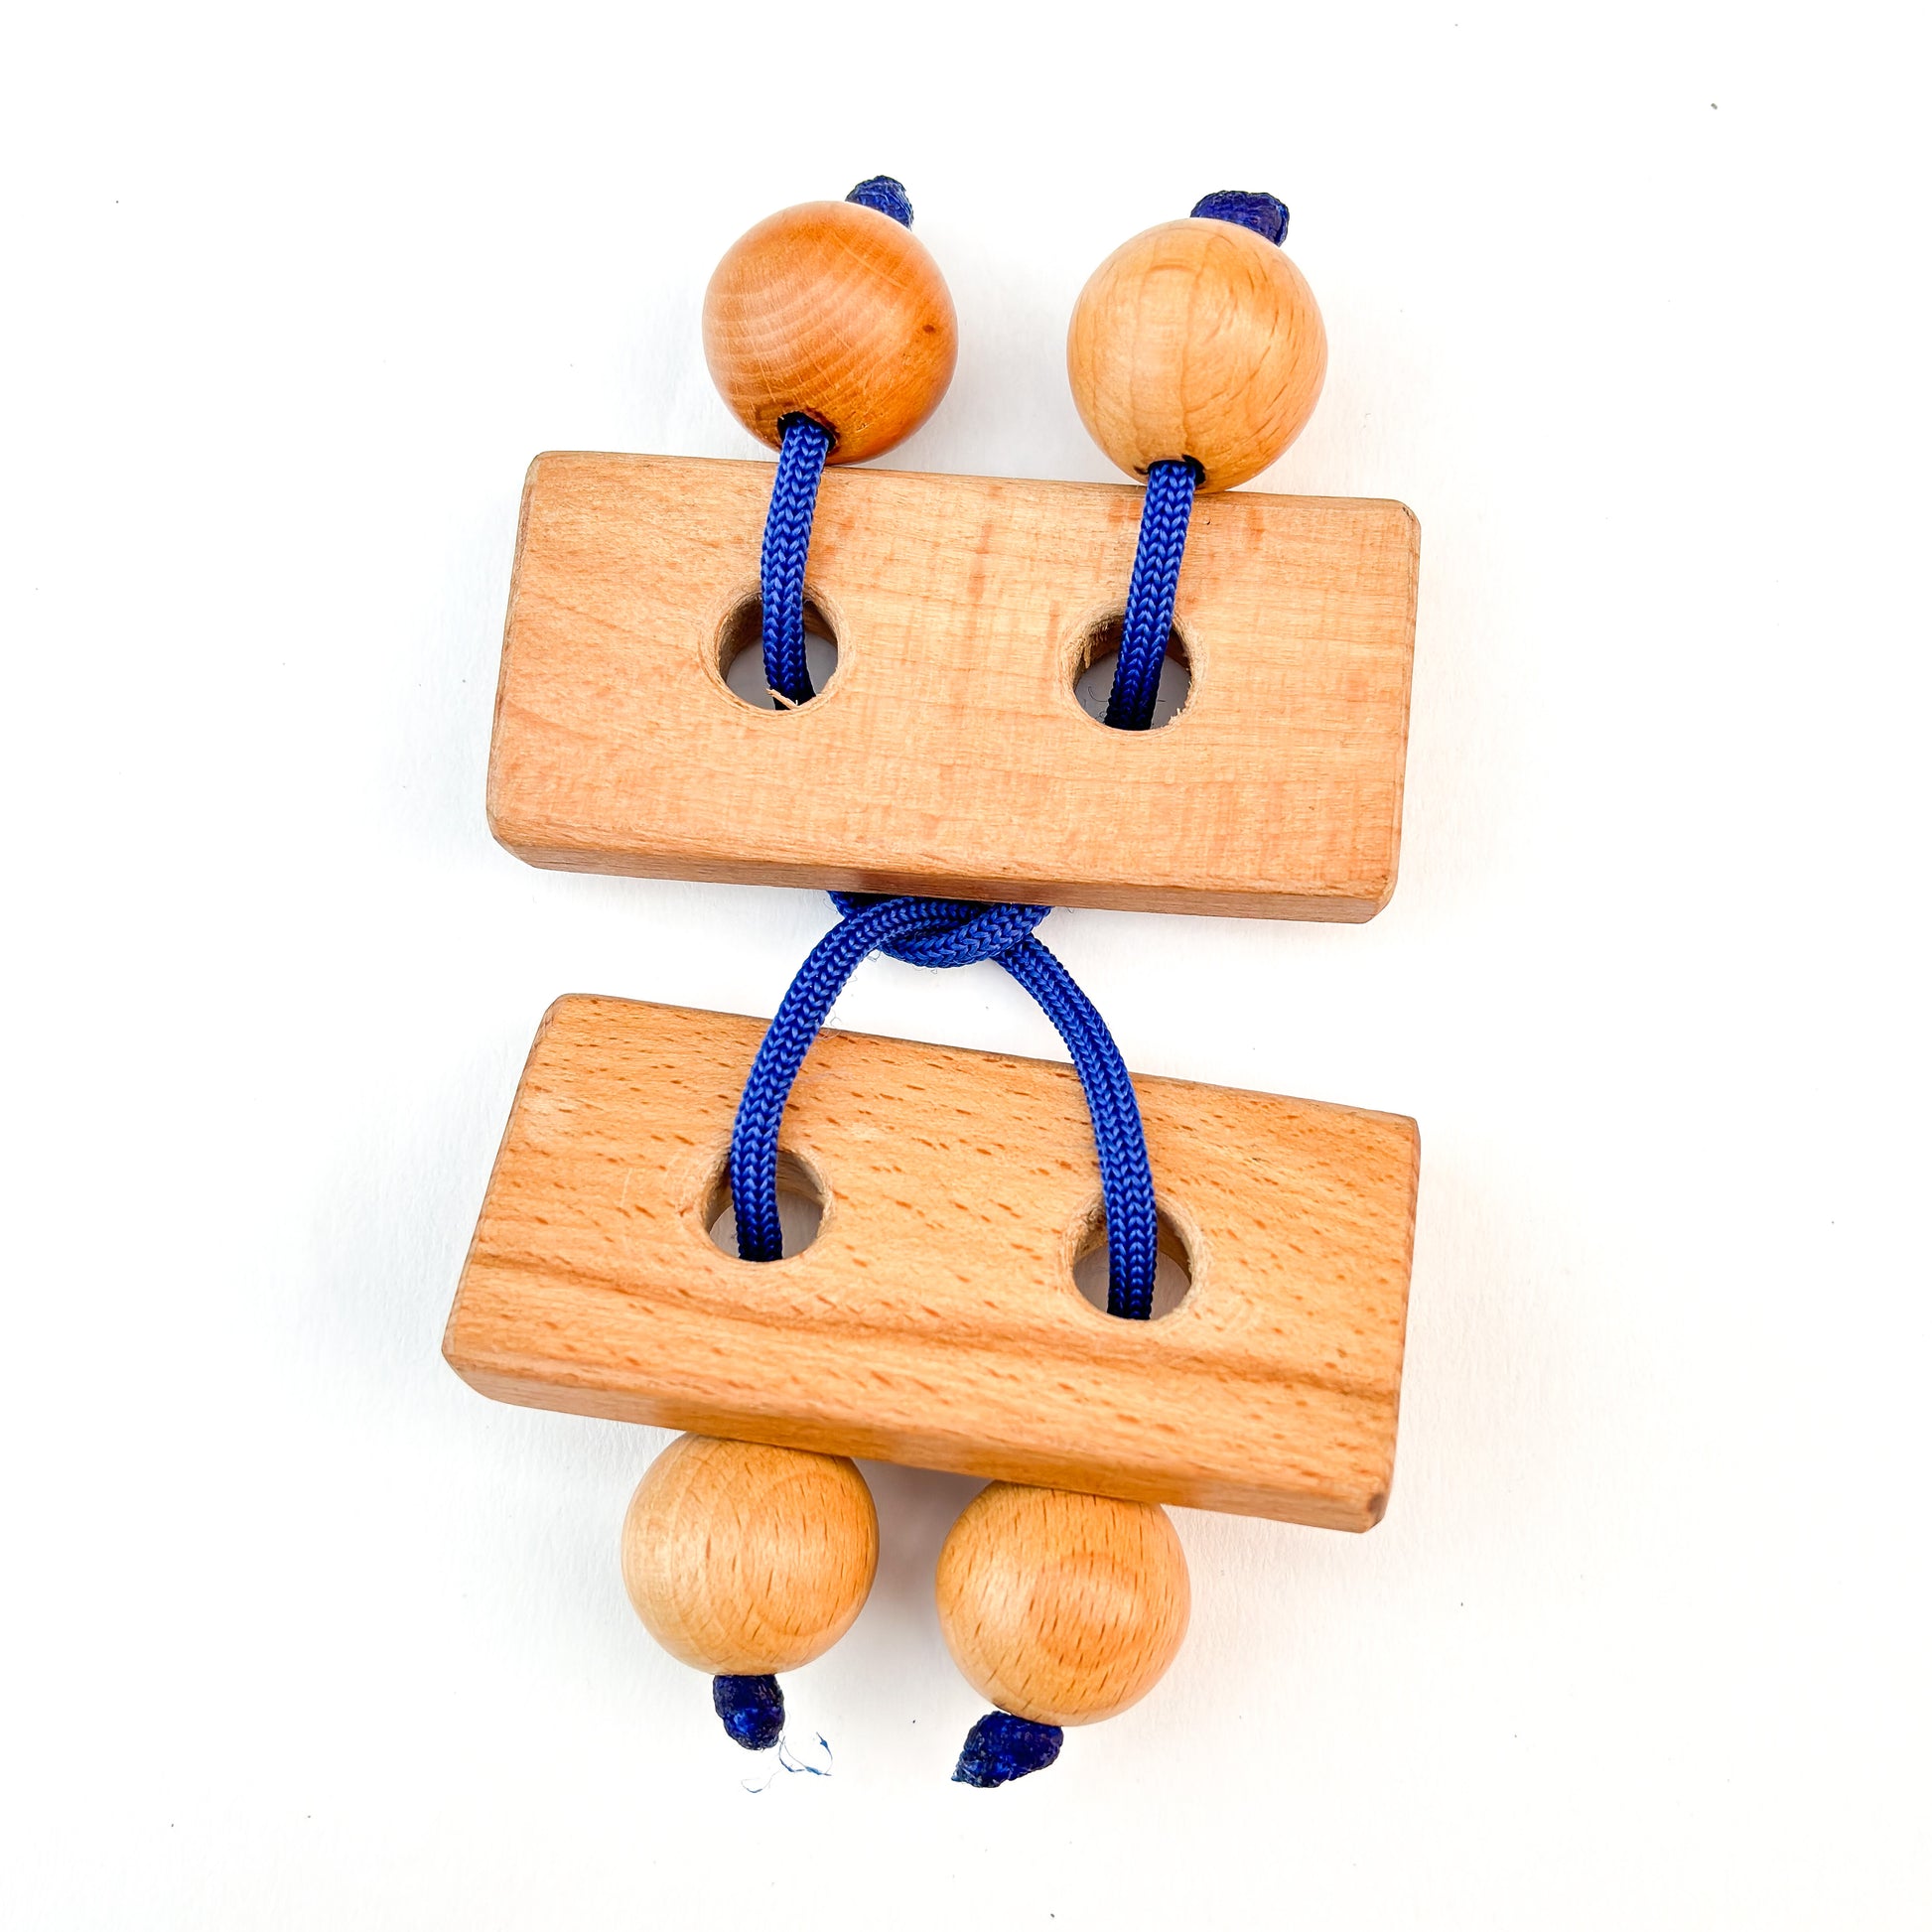 String Puzzle with four balls and two plates with blue rope to disentangle